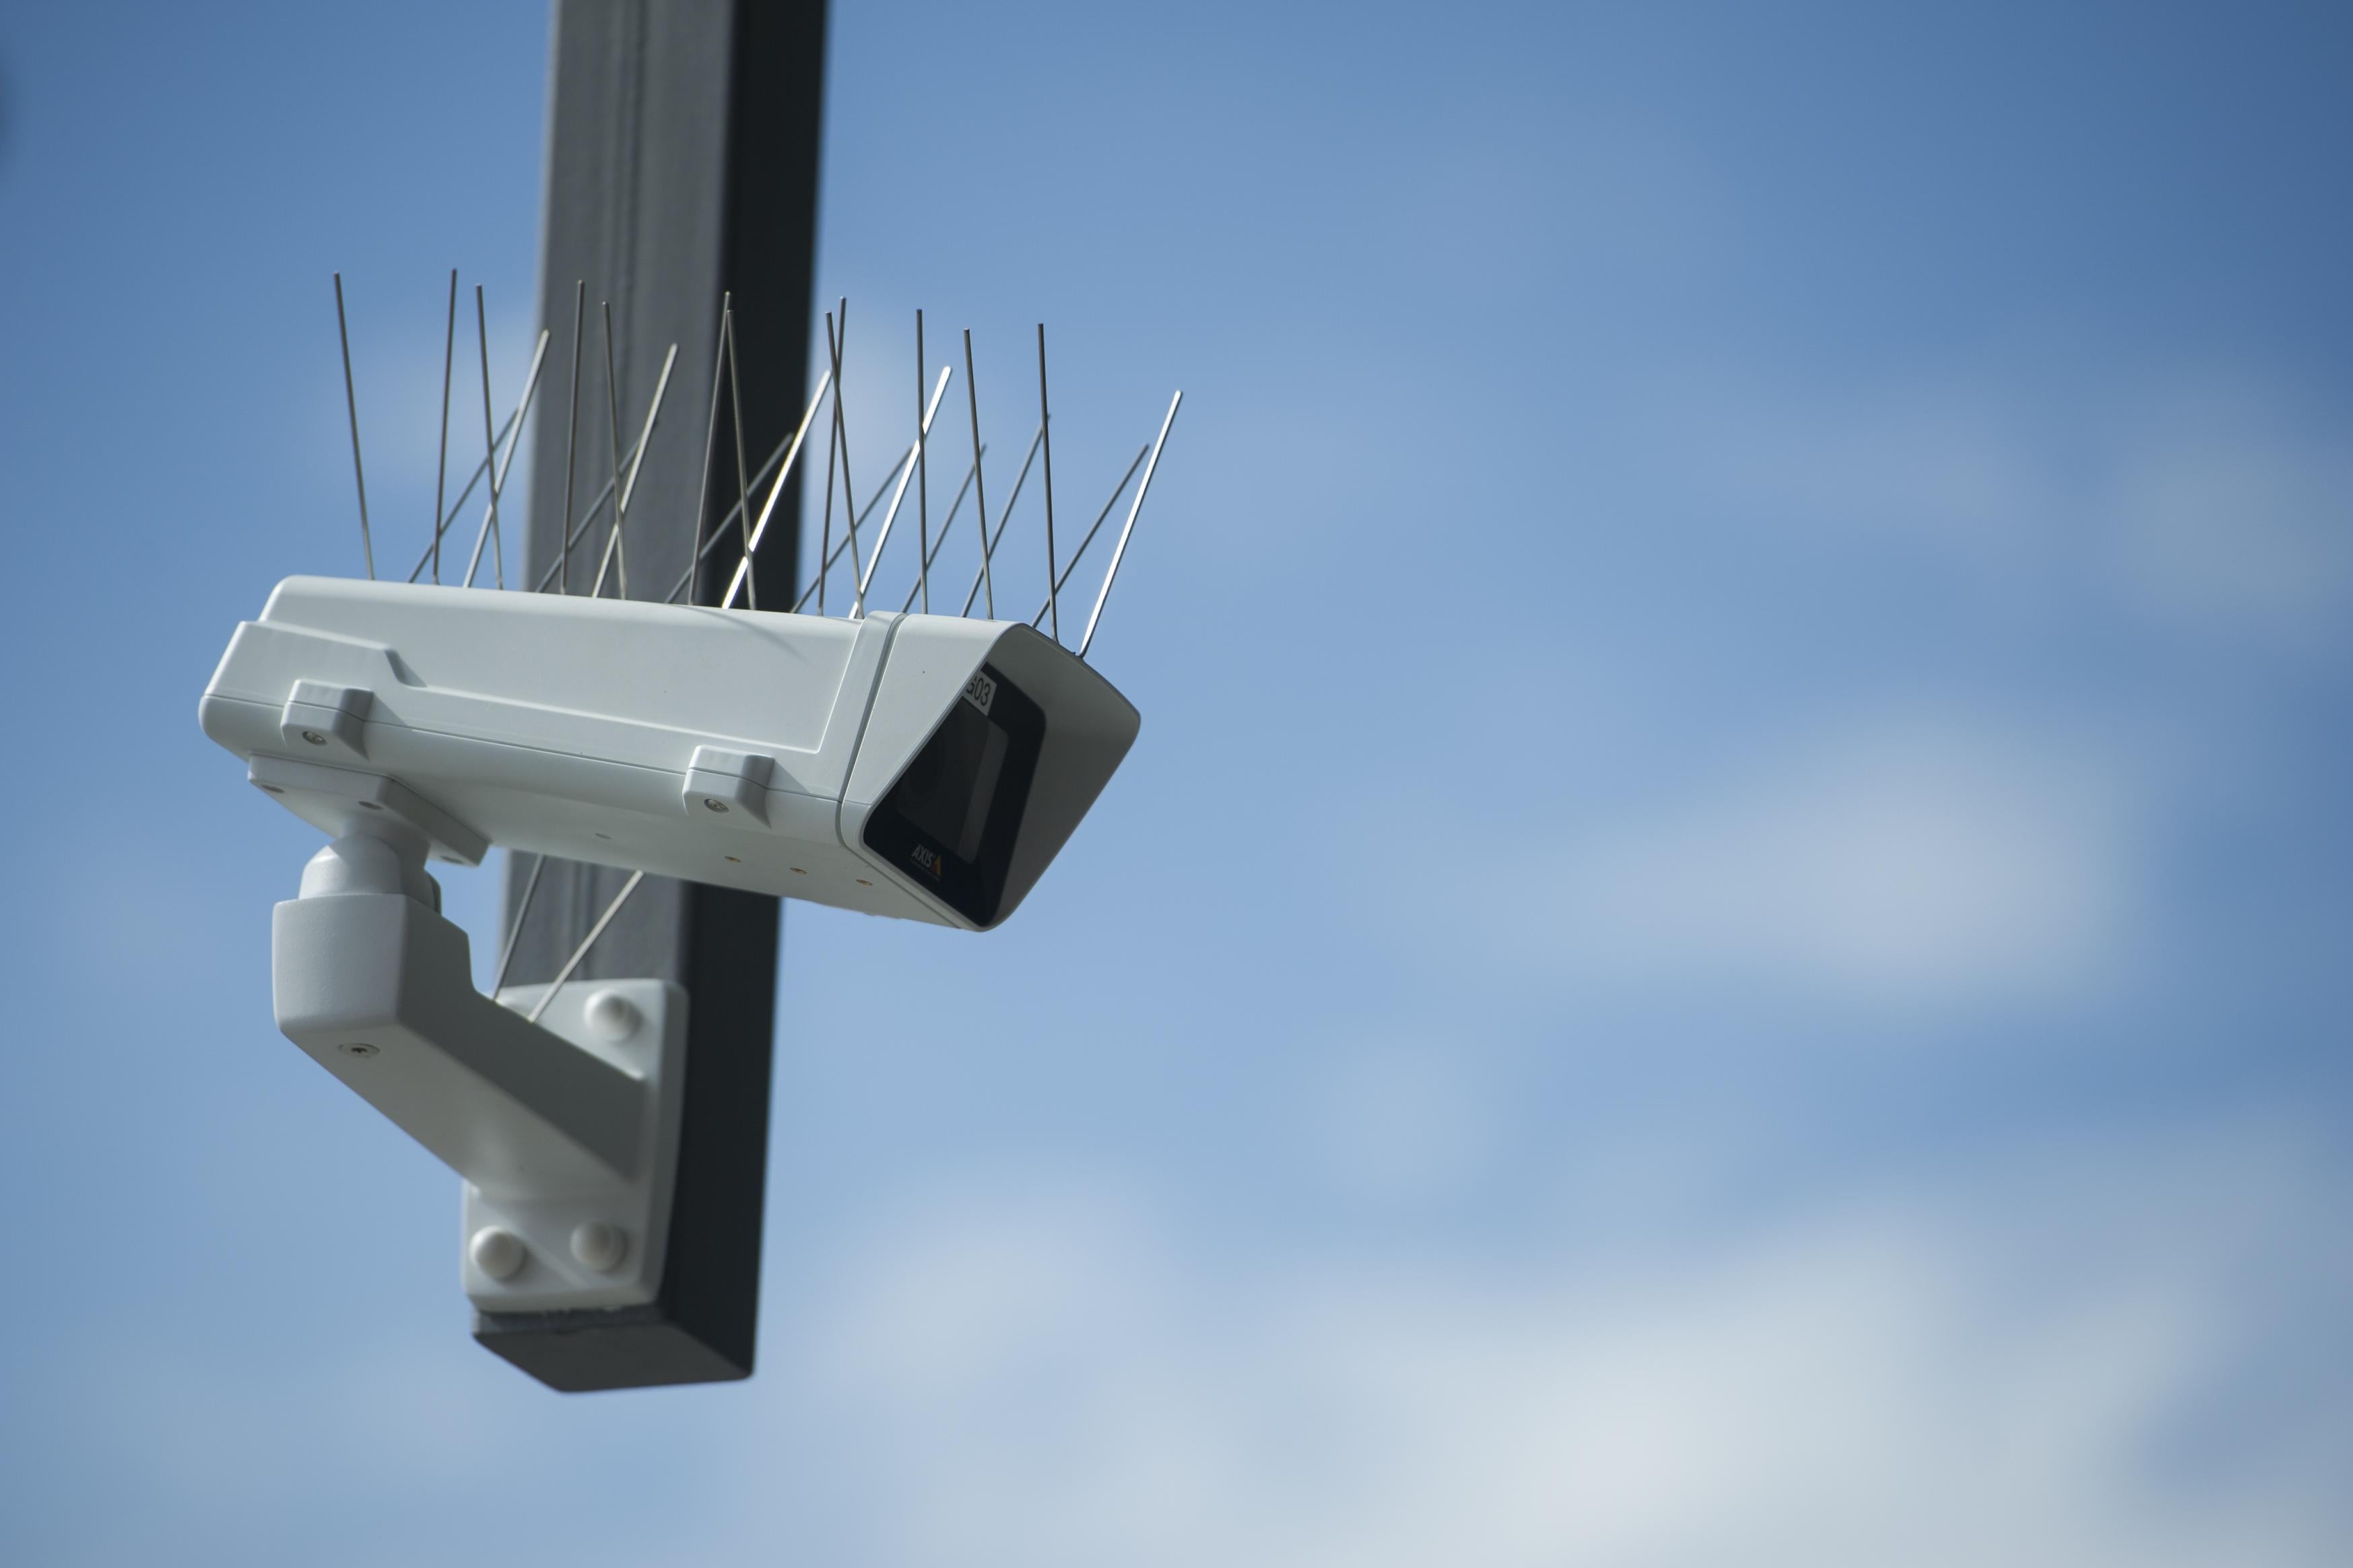 BERLIN, GERMANY - AUGUST 03: A surveillance camera which is part of facial recognition technology test is seen at Berlin Suedkreuz station on August 3, 2017 in Berlin, Germany. The technology is claimed could track terror suspects and help prevent future attacks. (Photo by Steffi Loos/Getty Images)